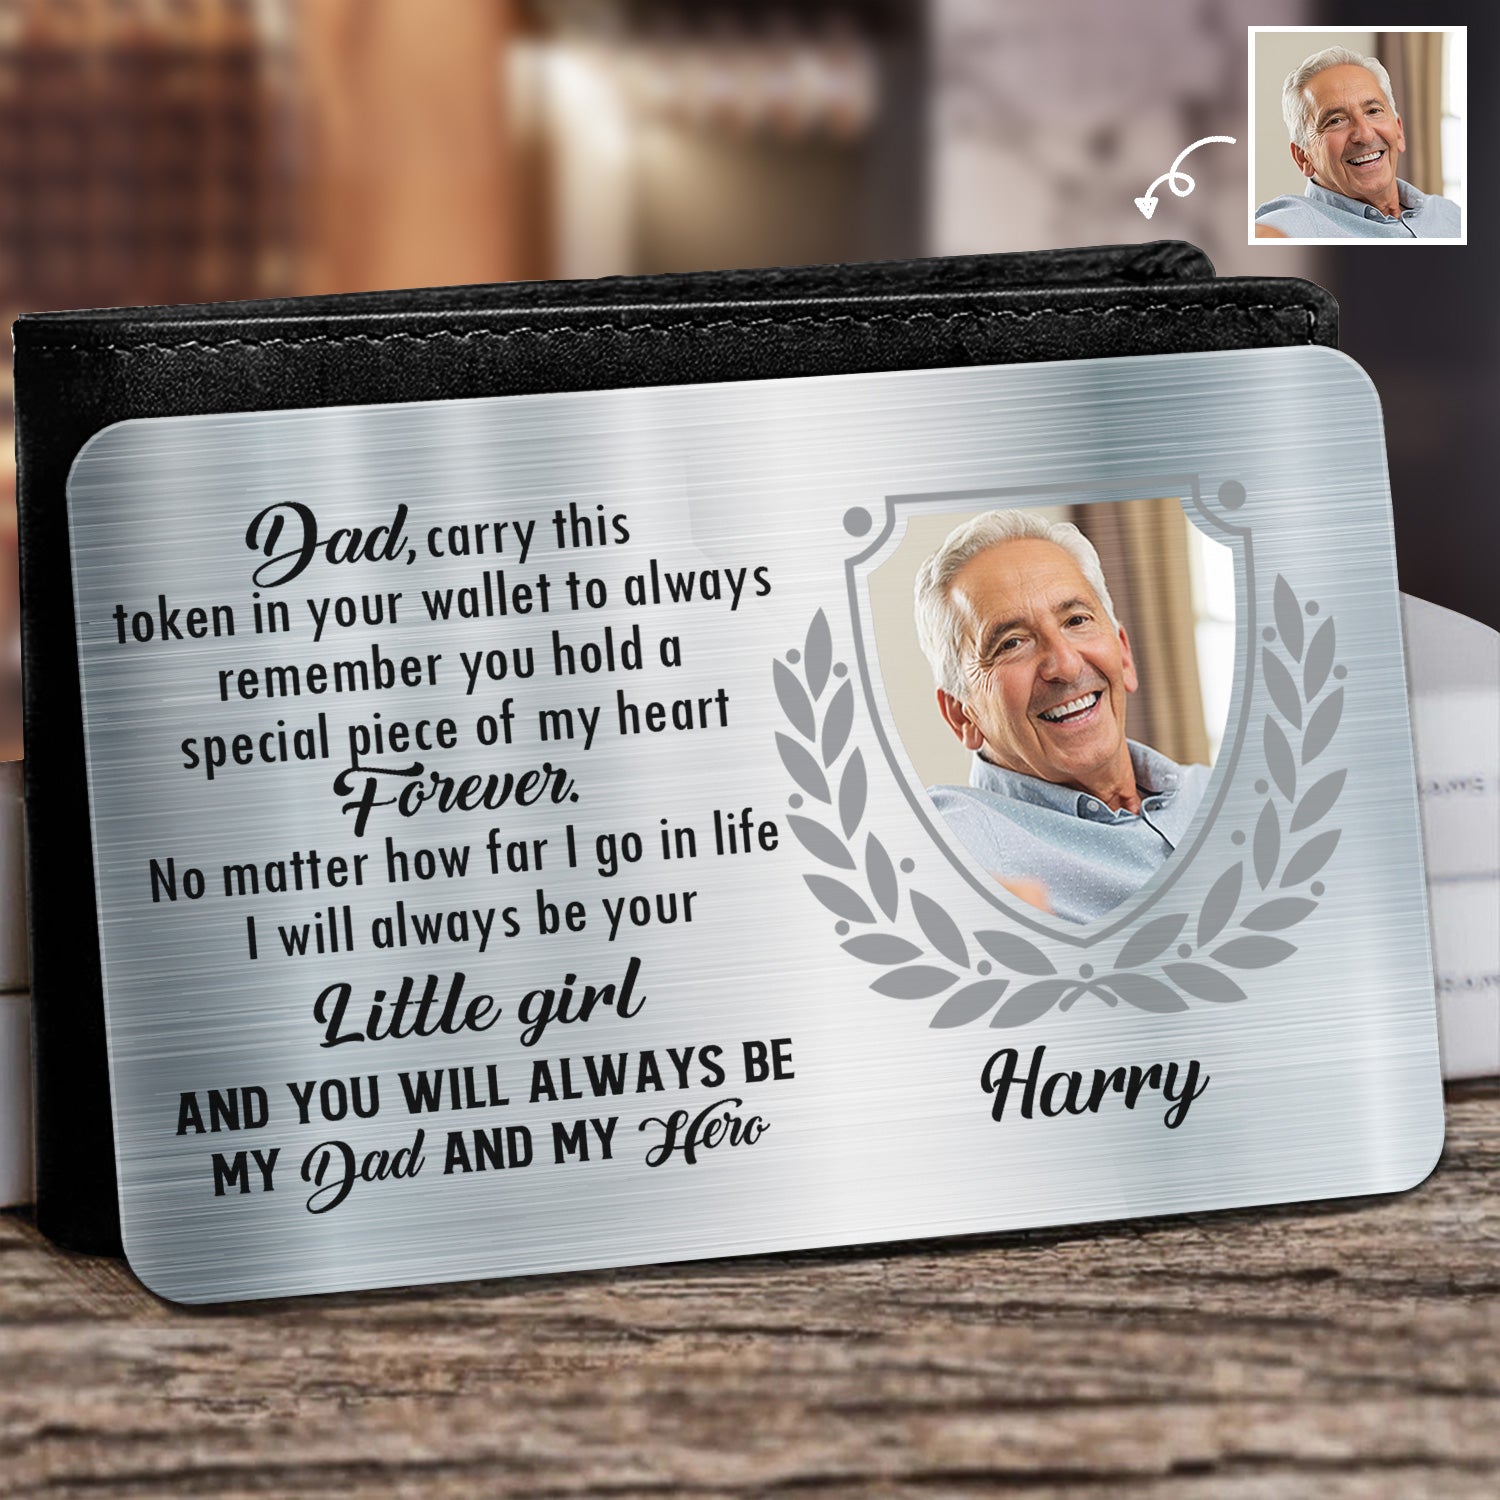 Custom Photo Carry This Token In Your Wallet - Personalized Aluminum Wallet Card